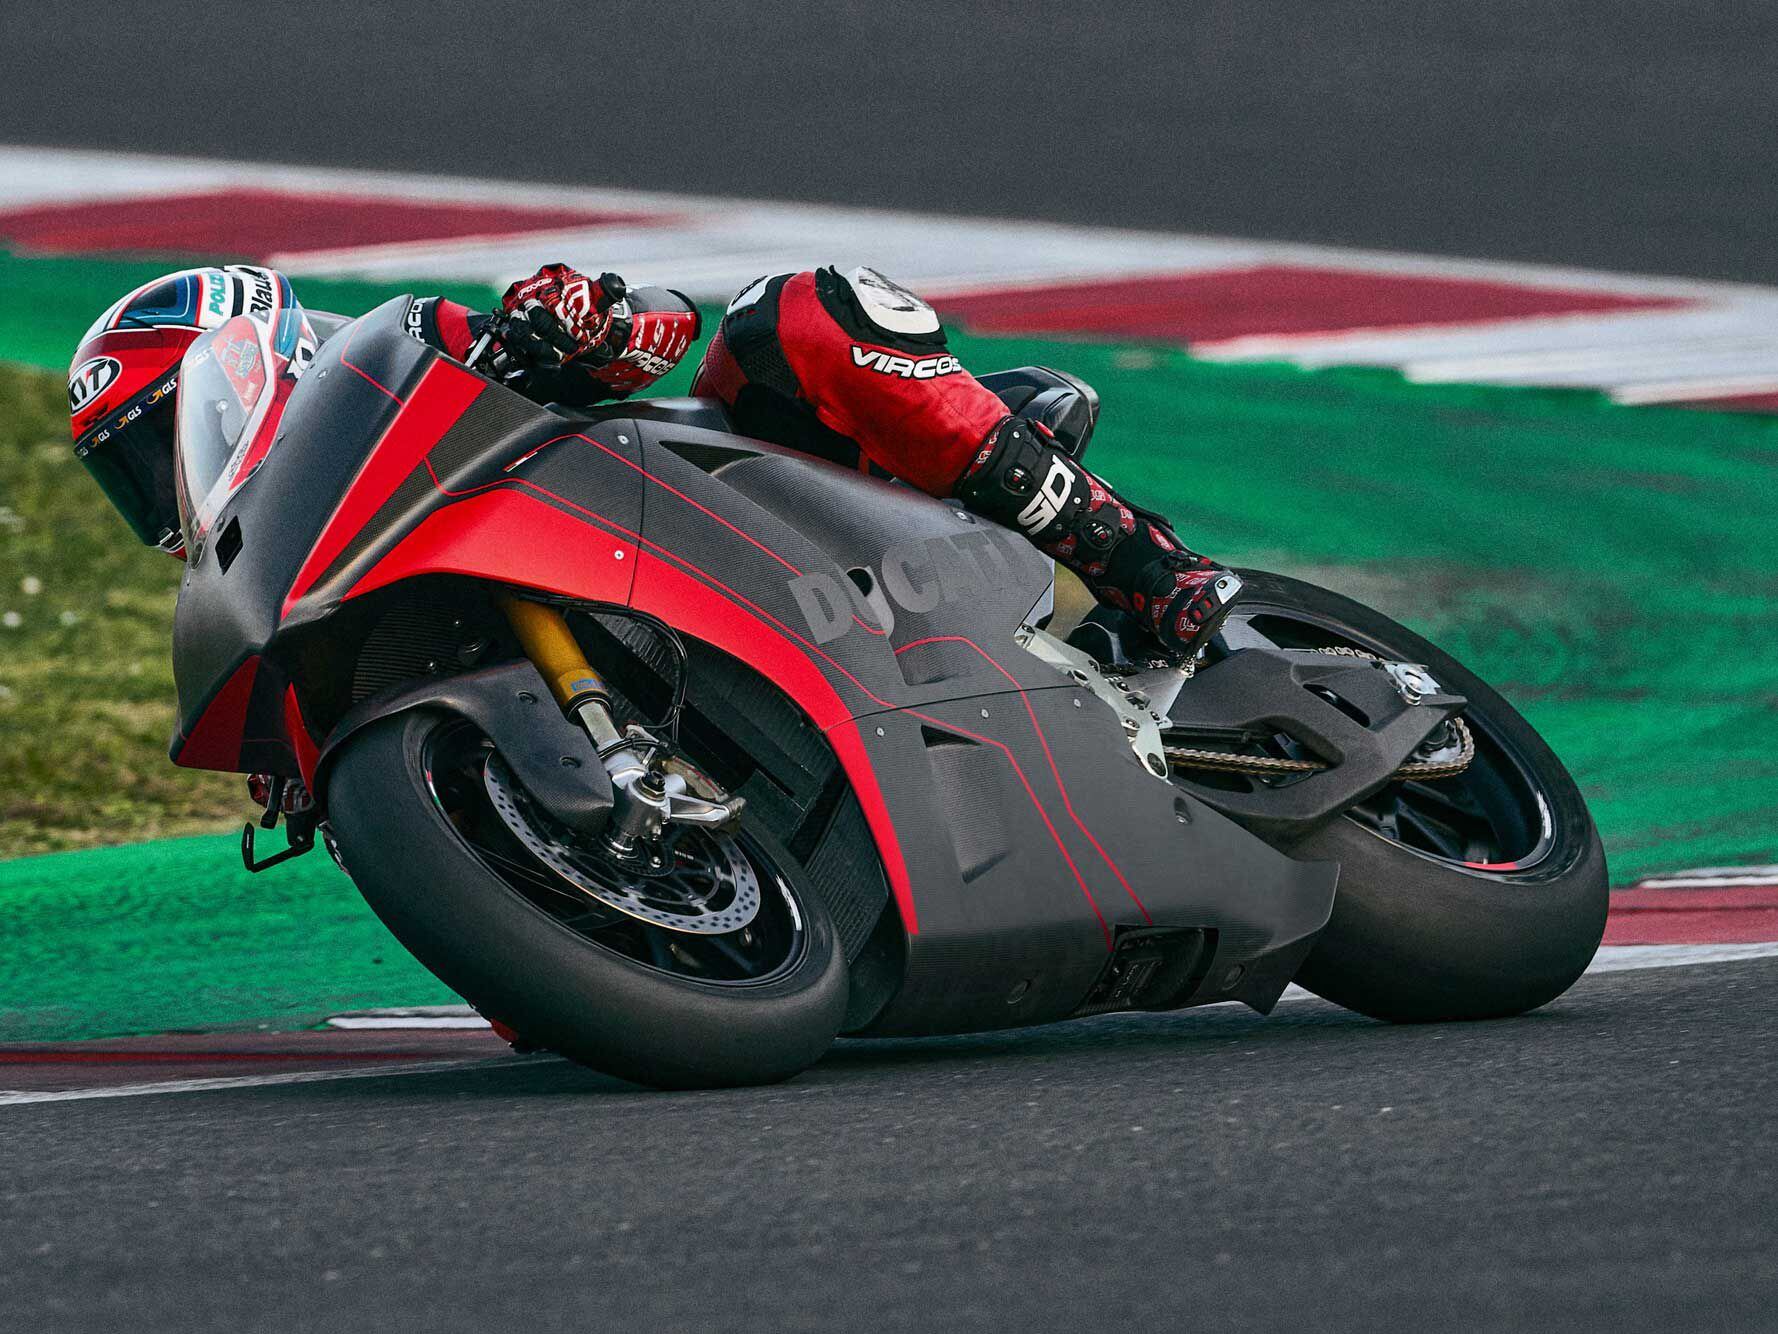 Ducati will officially enter the FIM MotoE series in 2023, but it’s already been seen testing an electric prototype racebike.